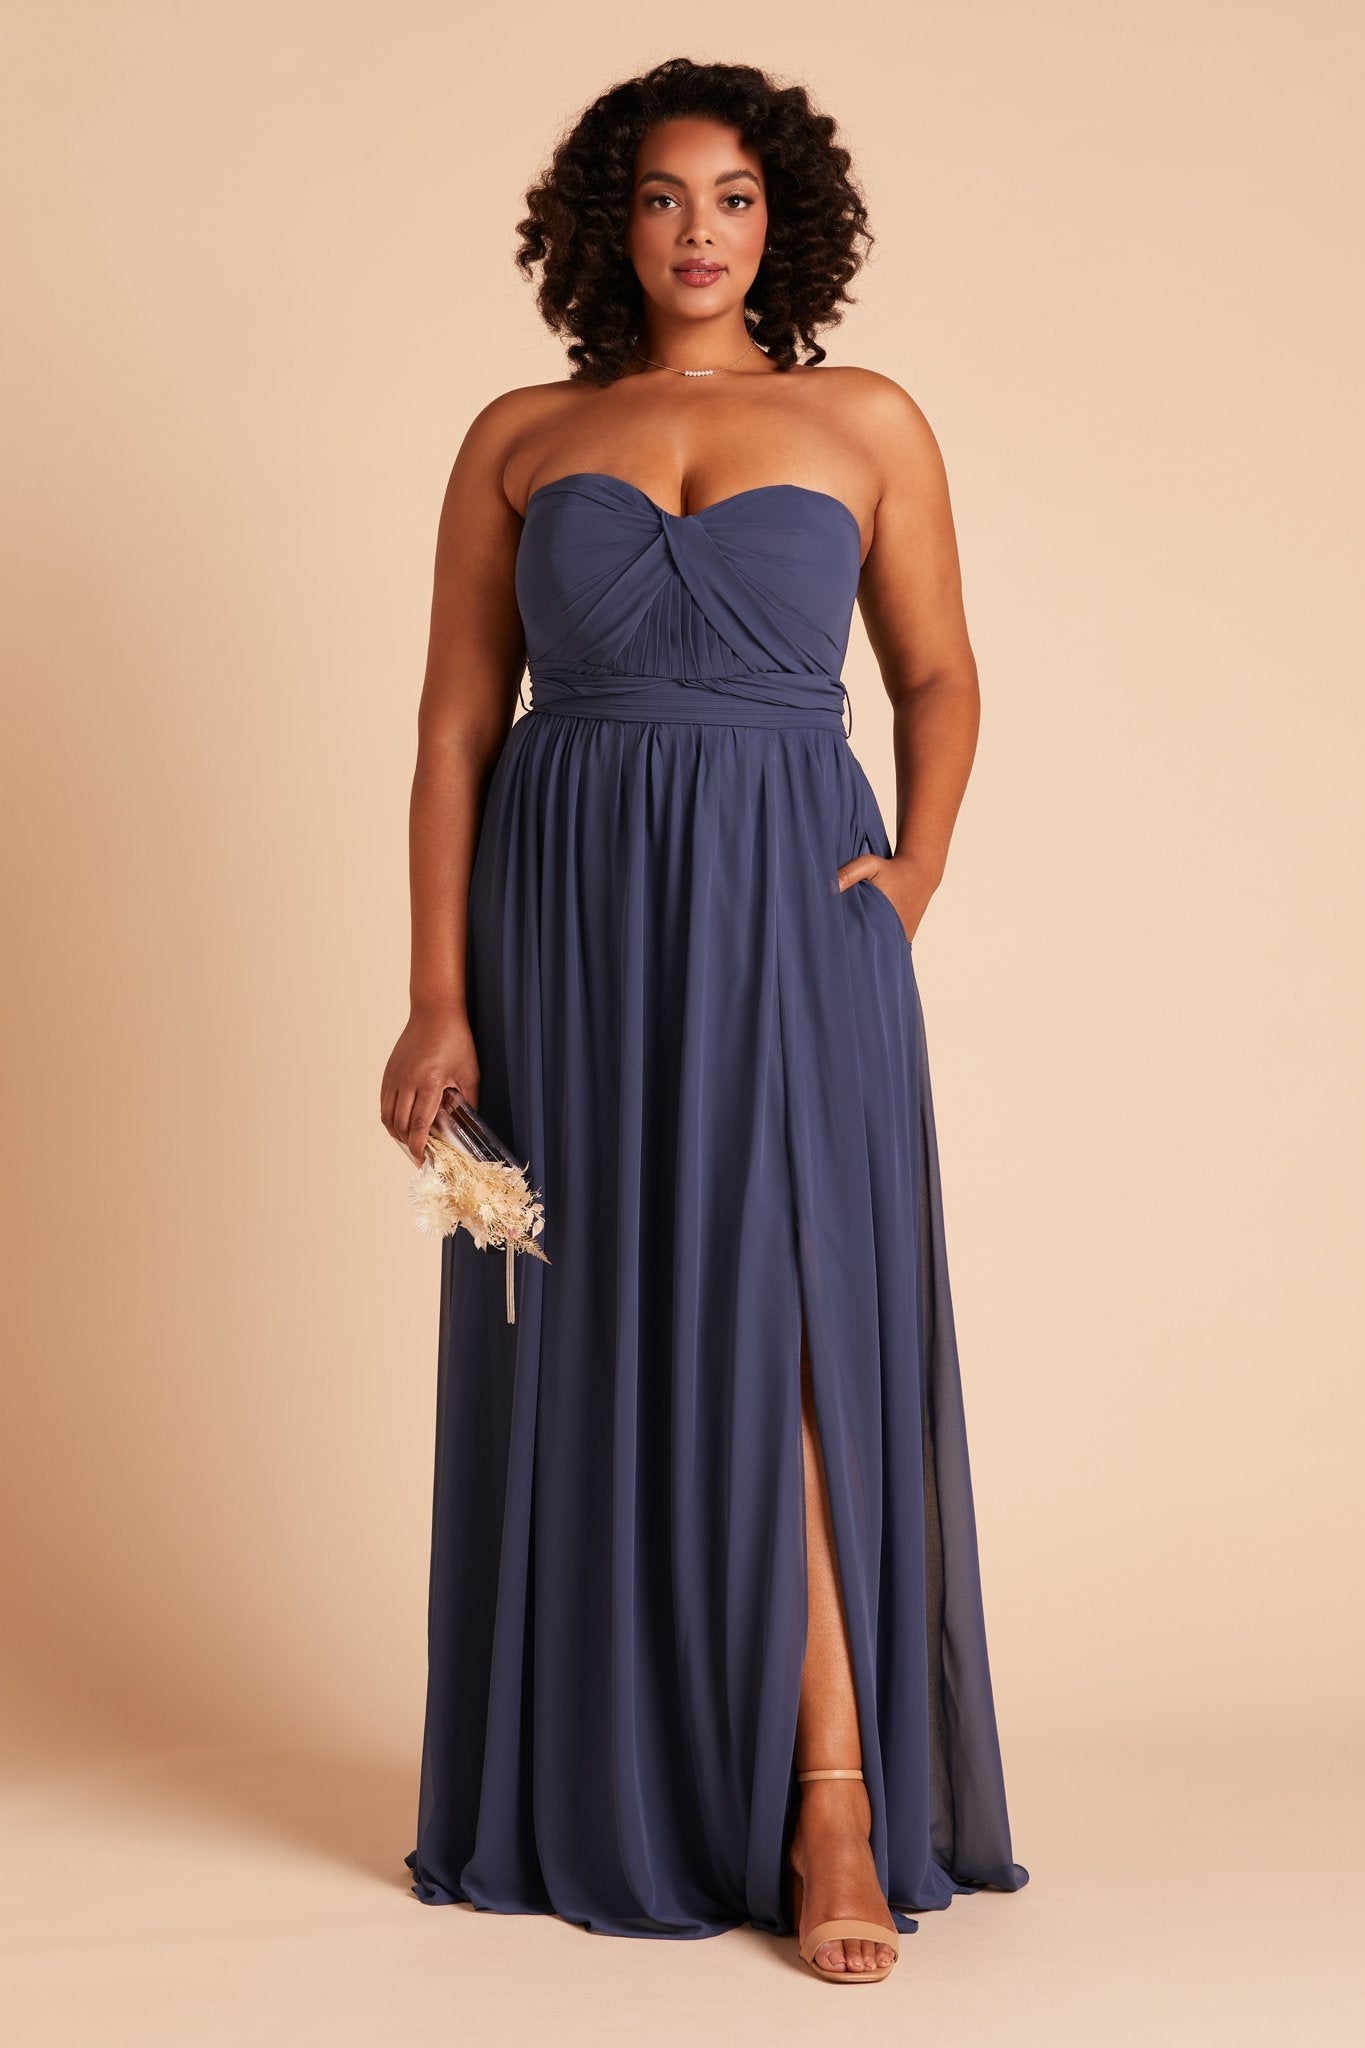 Grace convertible plus size bridesmaid dress with slit in slate blue chiffon by Birdy Grey, front view with hand in pocket